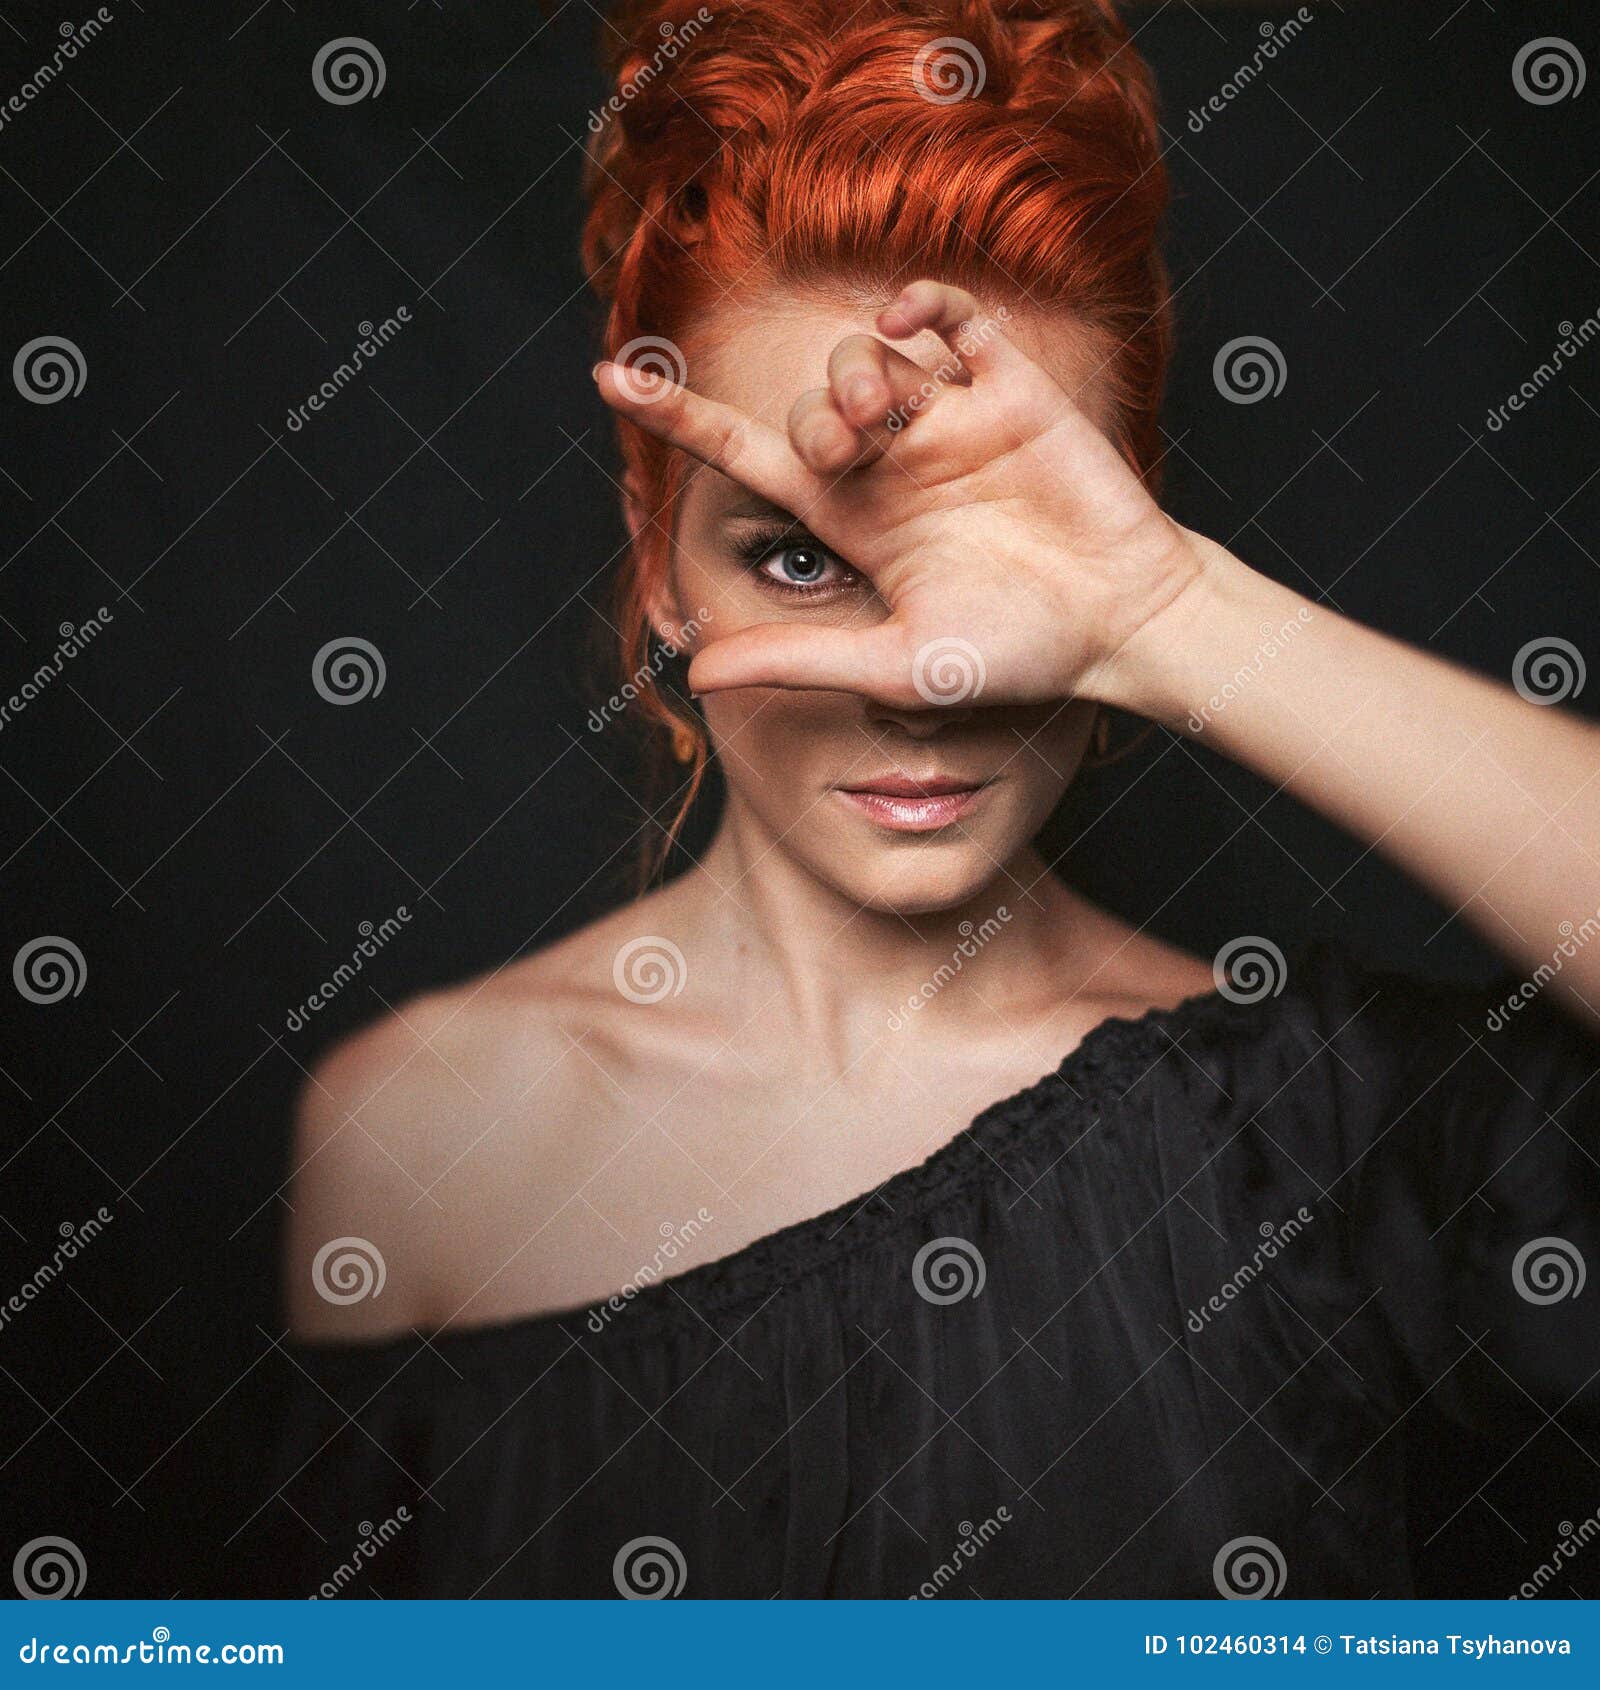 portrait of redhead woman with blue eyes. girl looks directly into the camera through her fingers.